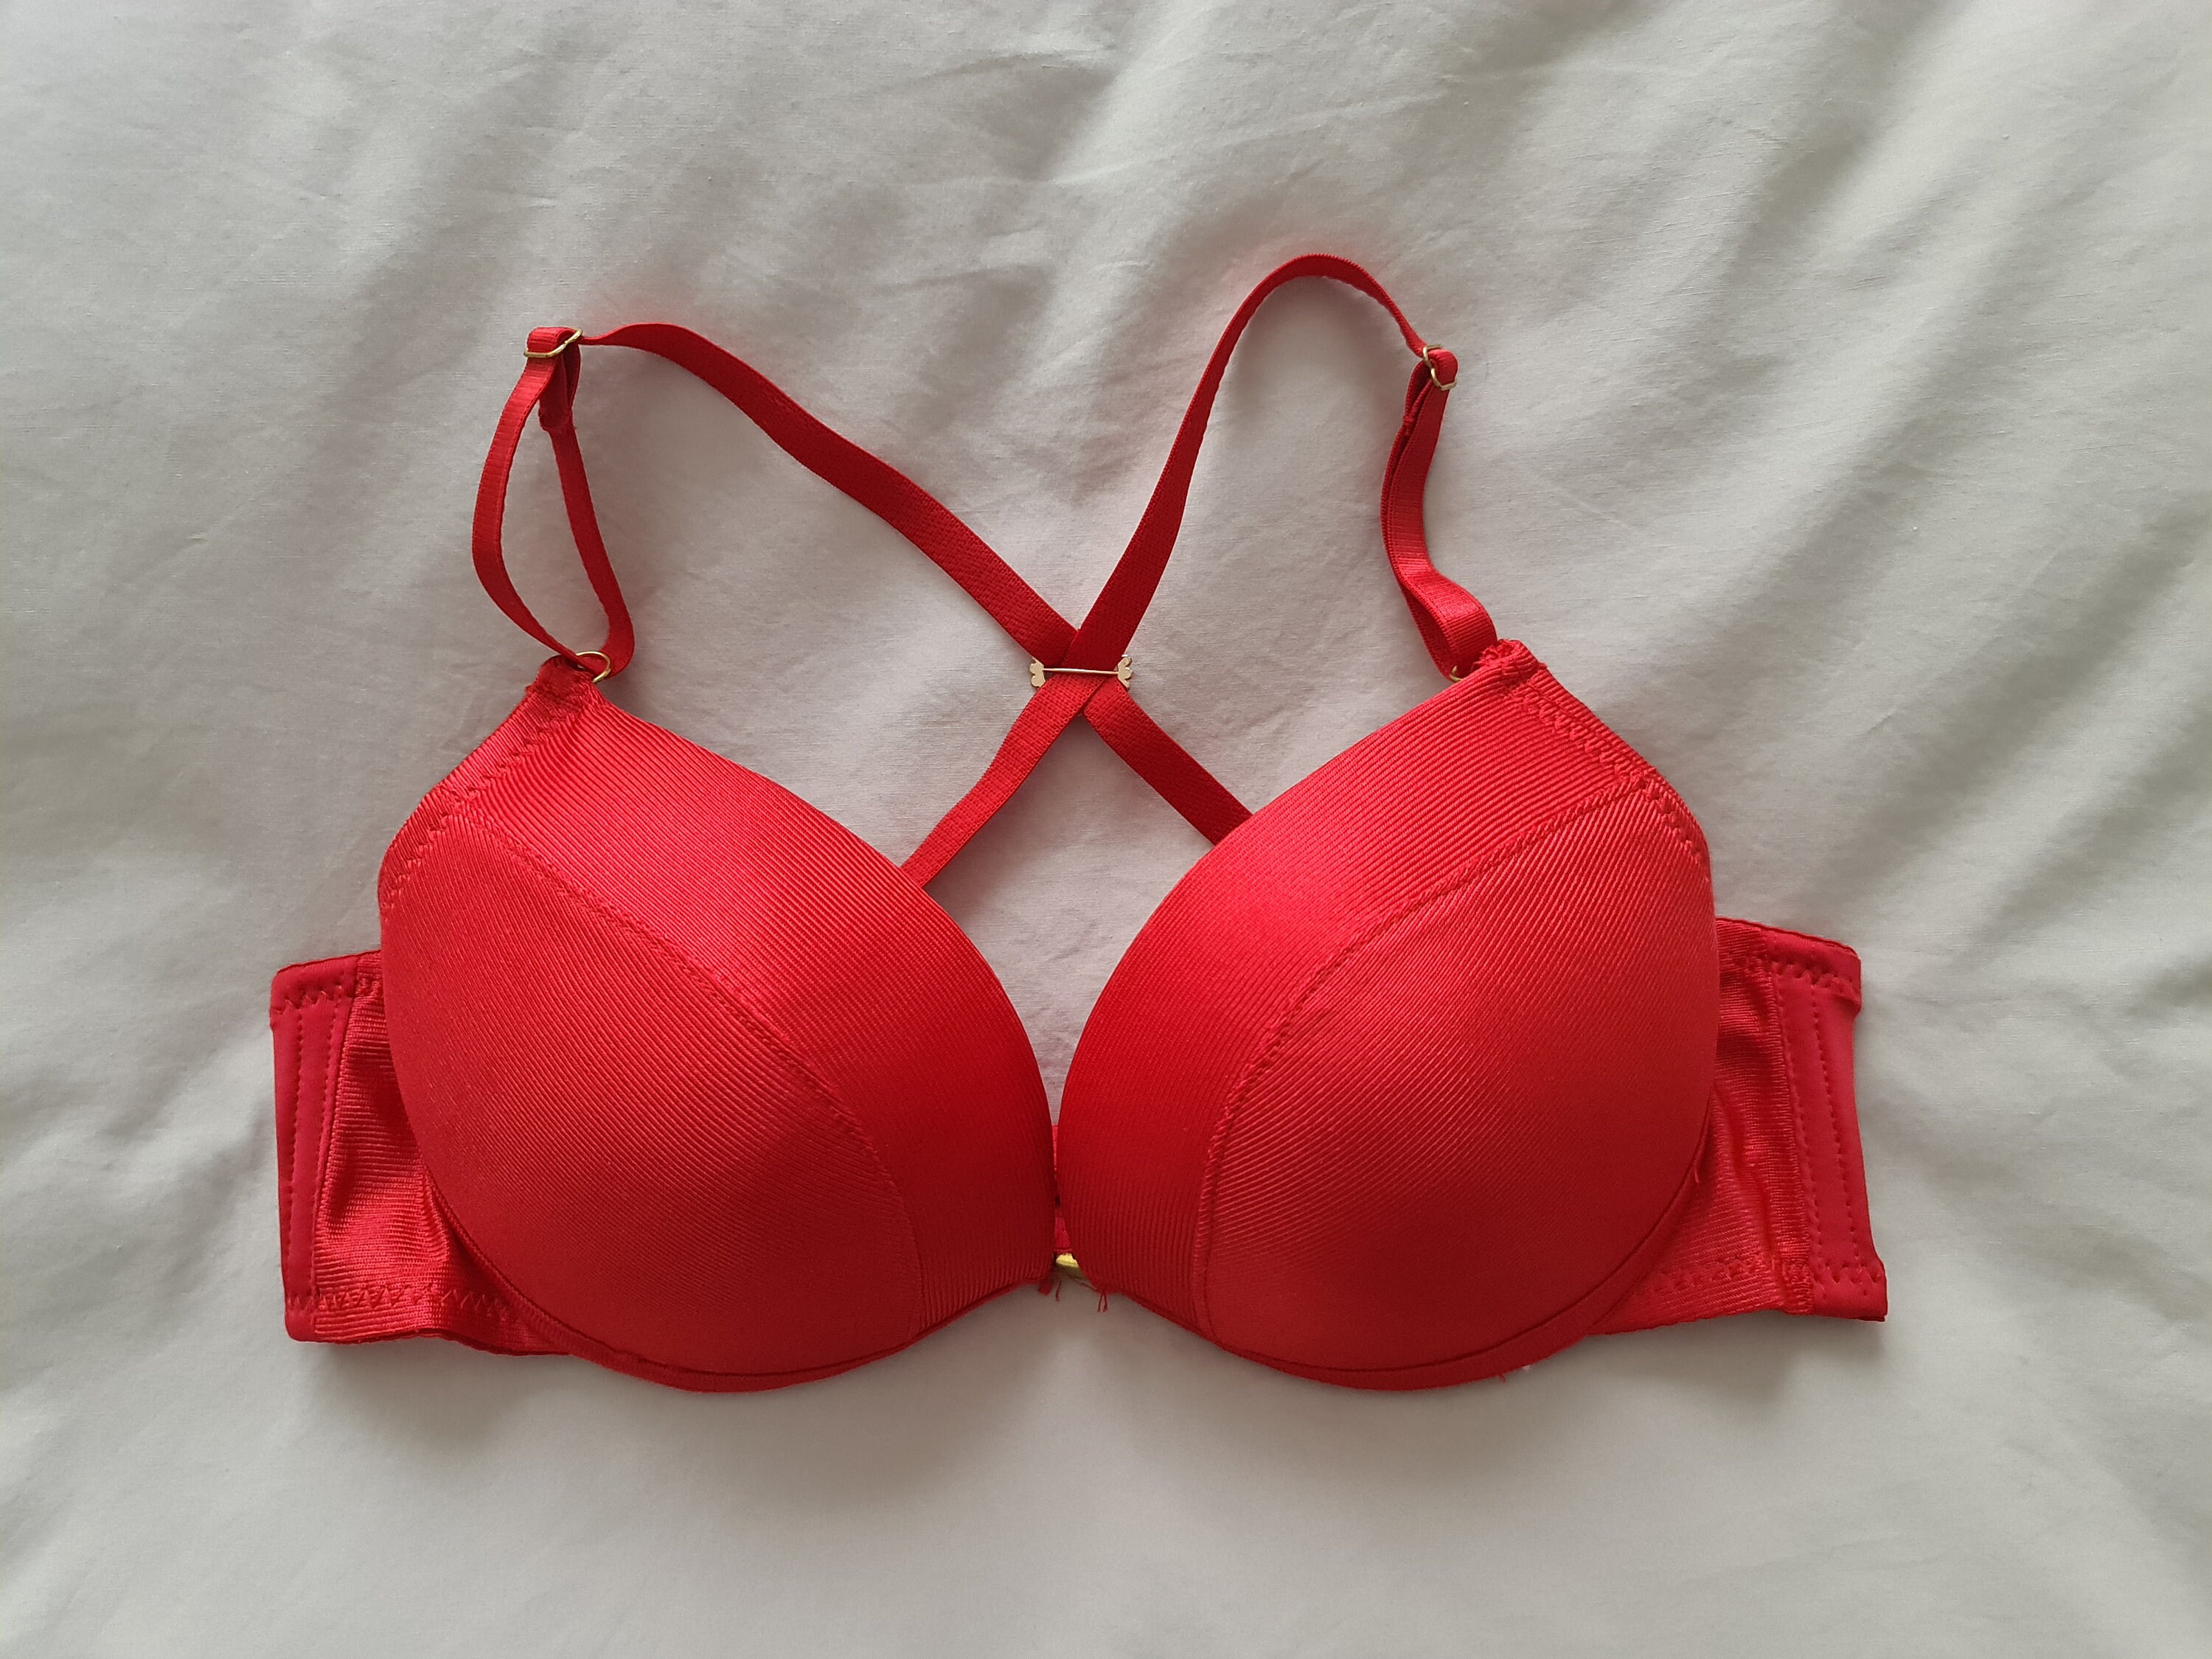 Vintage Bra From Japan size 12A Aus & 34A UK/US, Japan C75 -  Canada